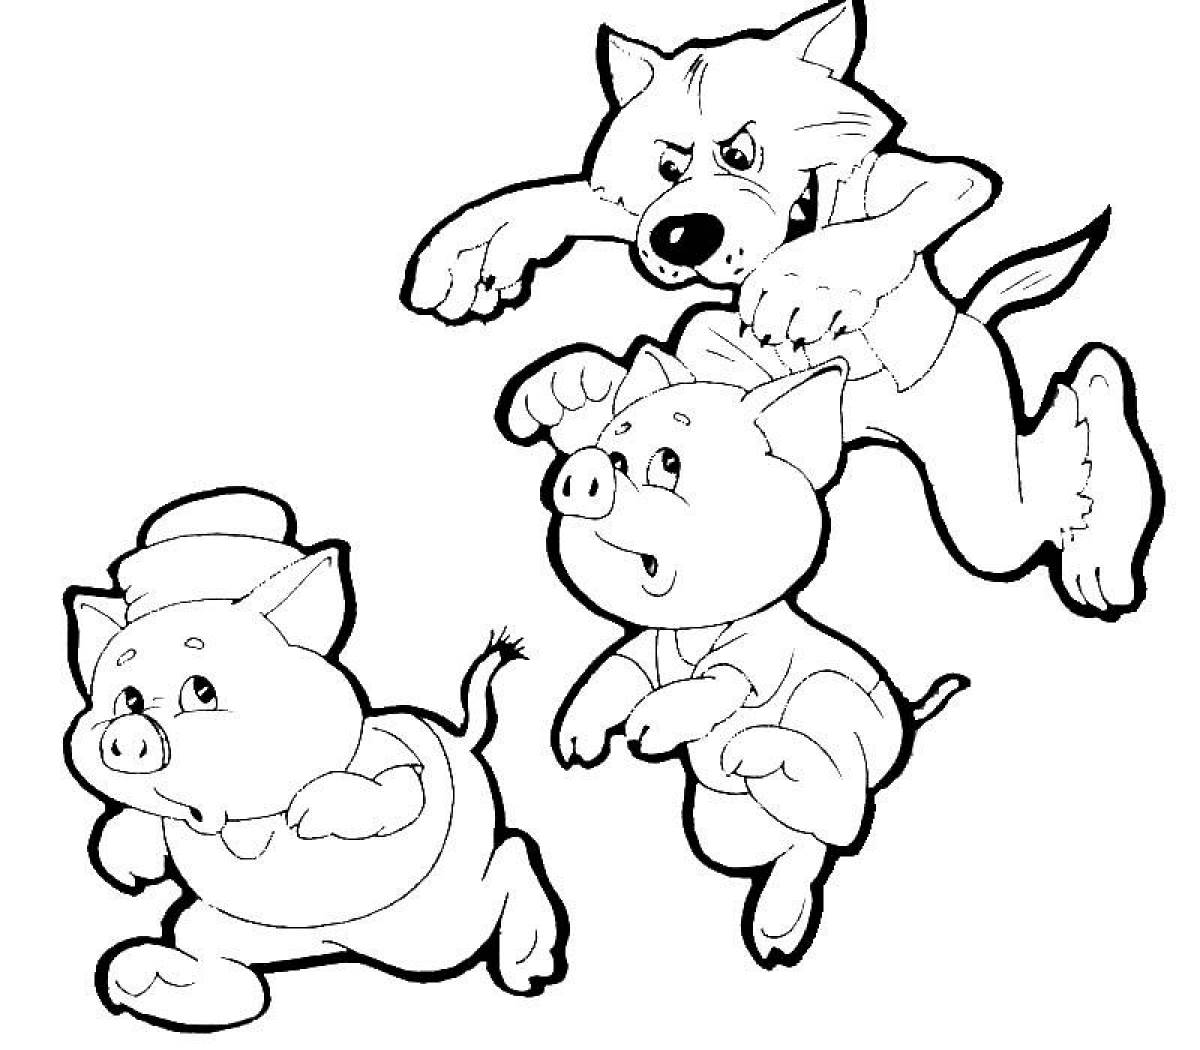 Piglets run away from the wolf